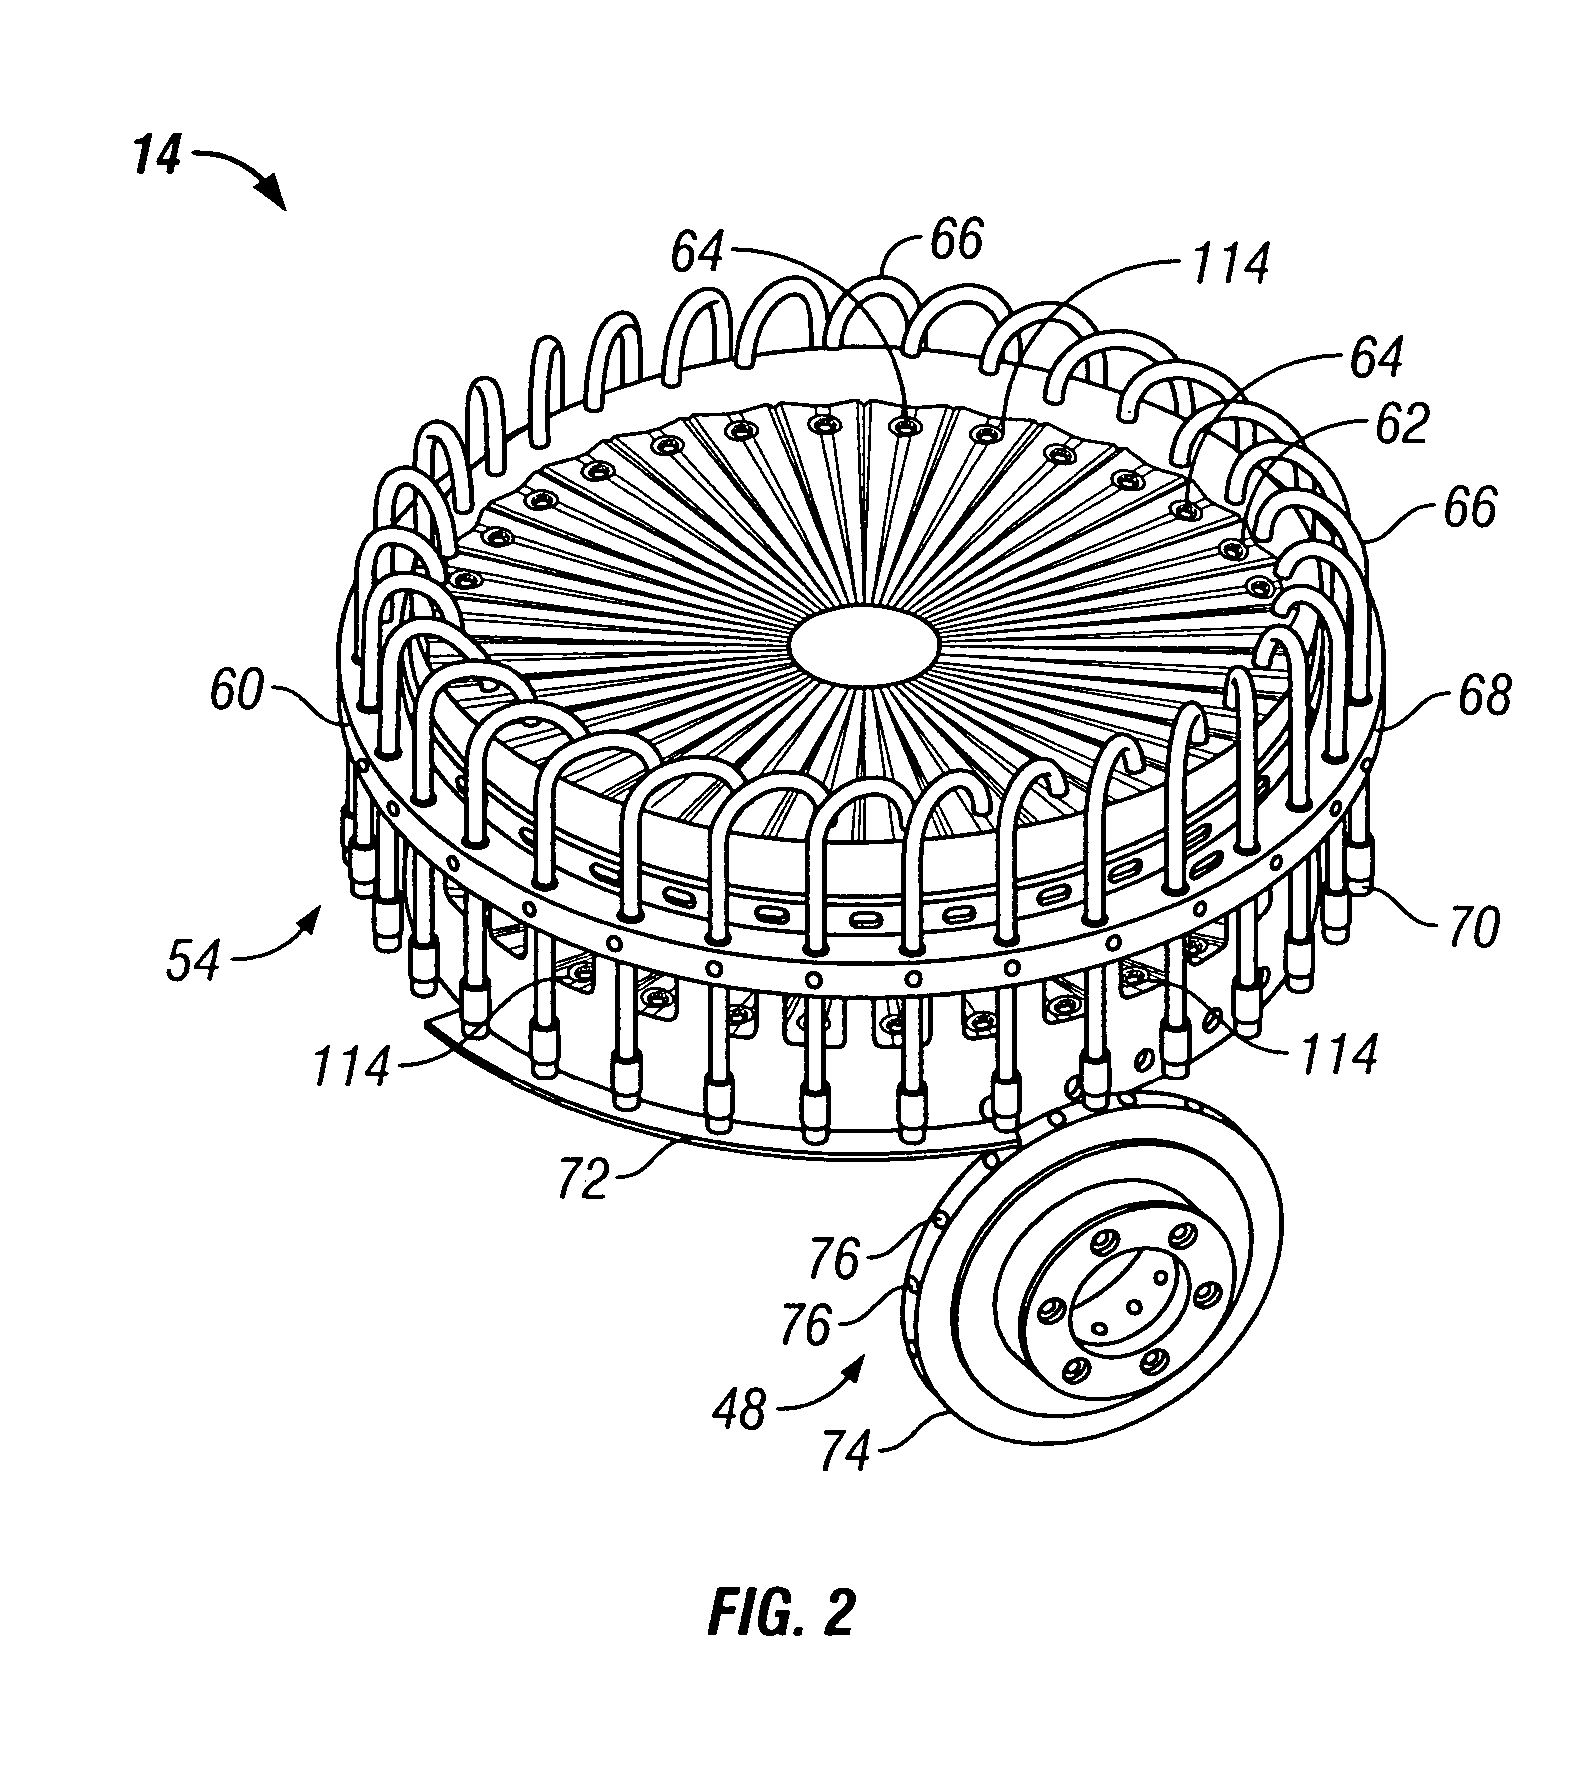 Method and apparatus for incorporating objects into cigarette filters